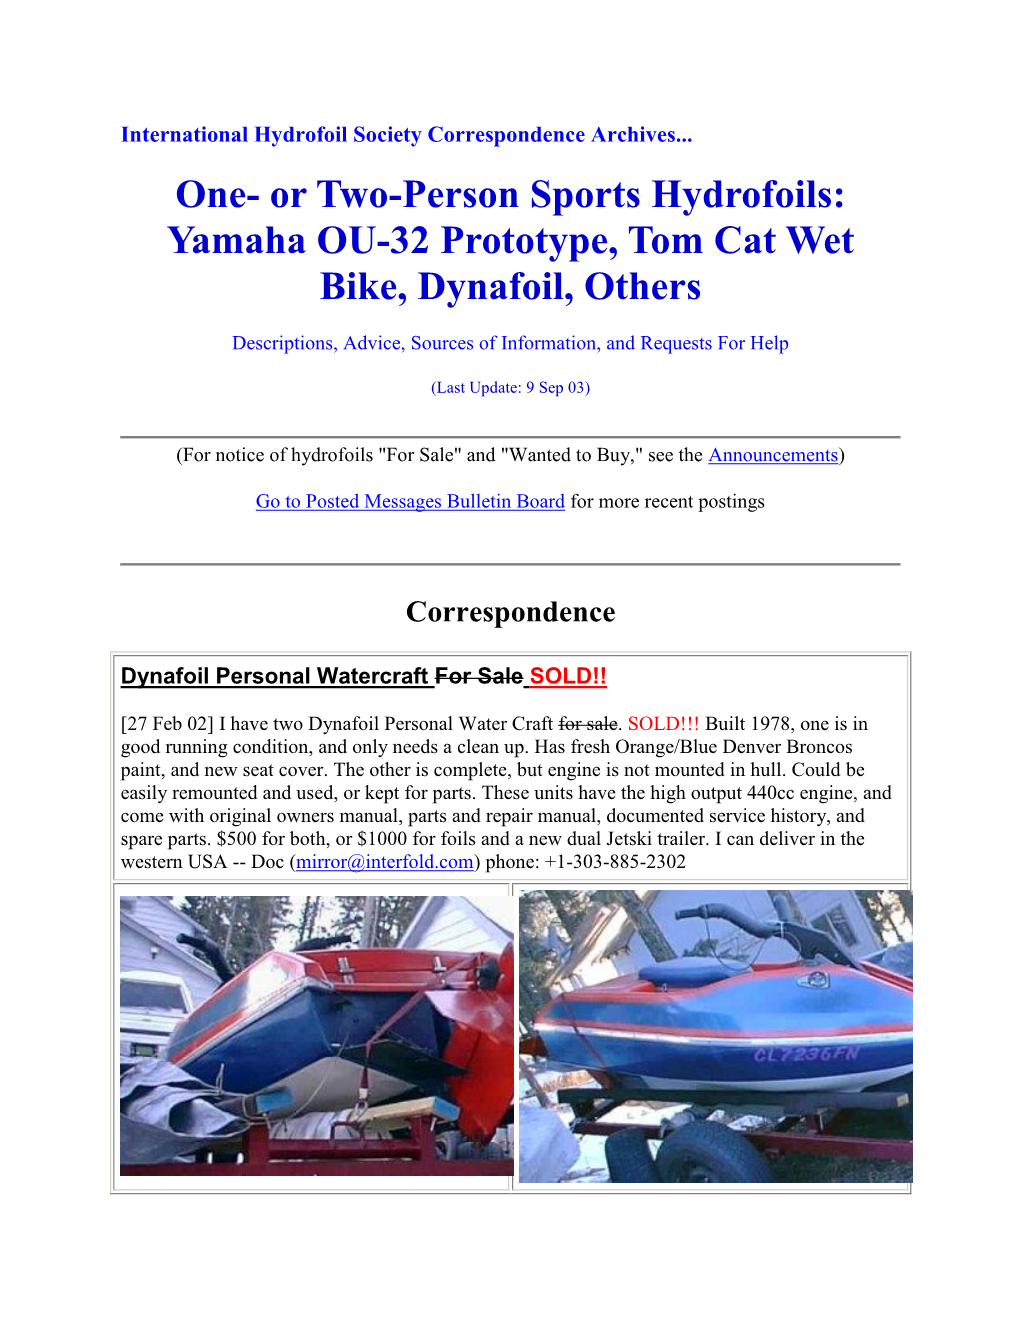 One- Or Two-Person Sports Hydrofoils: Yamaha OU-32 Prototype, Tom Cat Wet Bike, Dynafoil, Others